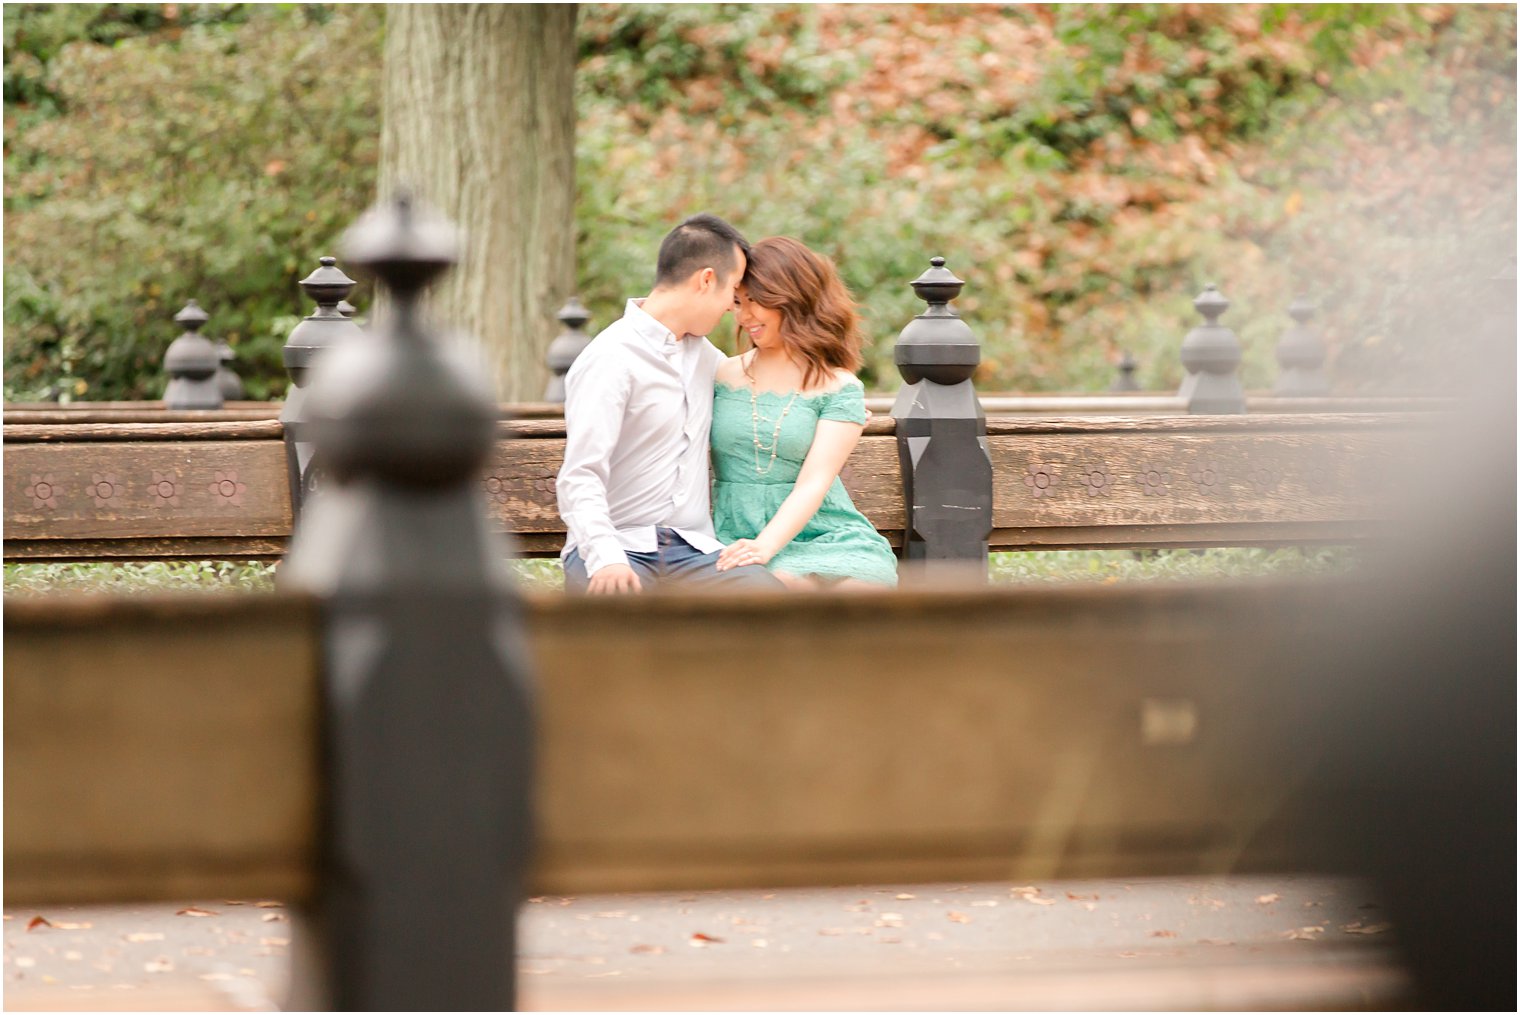 Engagement photos on park bench in Central Park | Photos by Idalia Photography